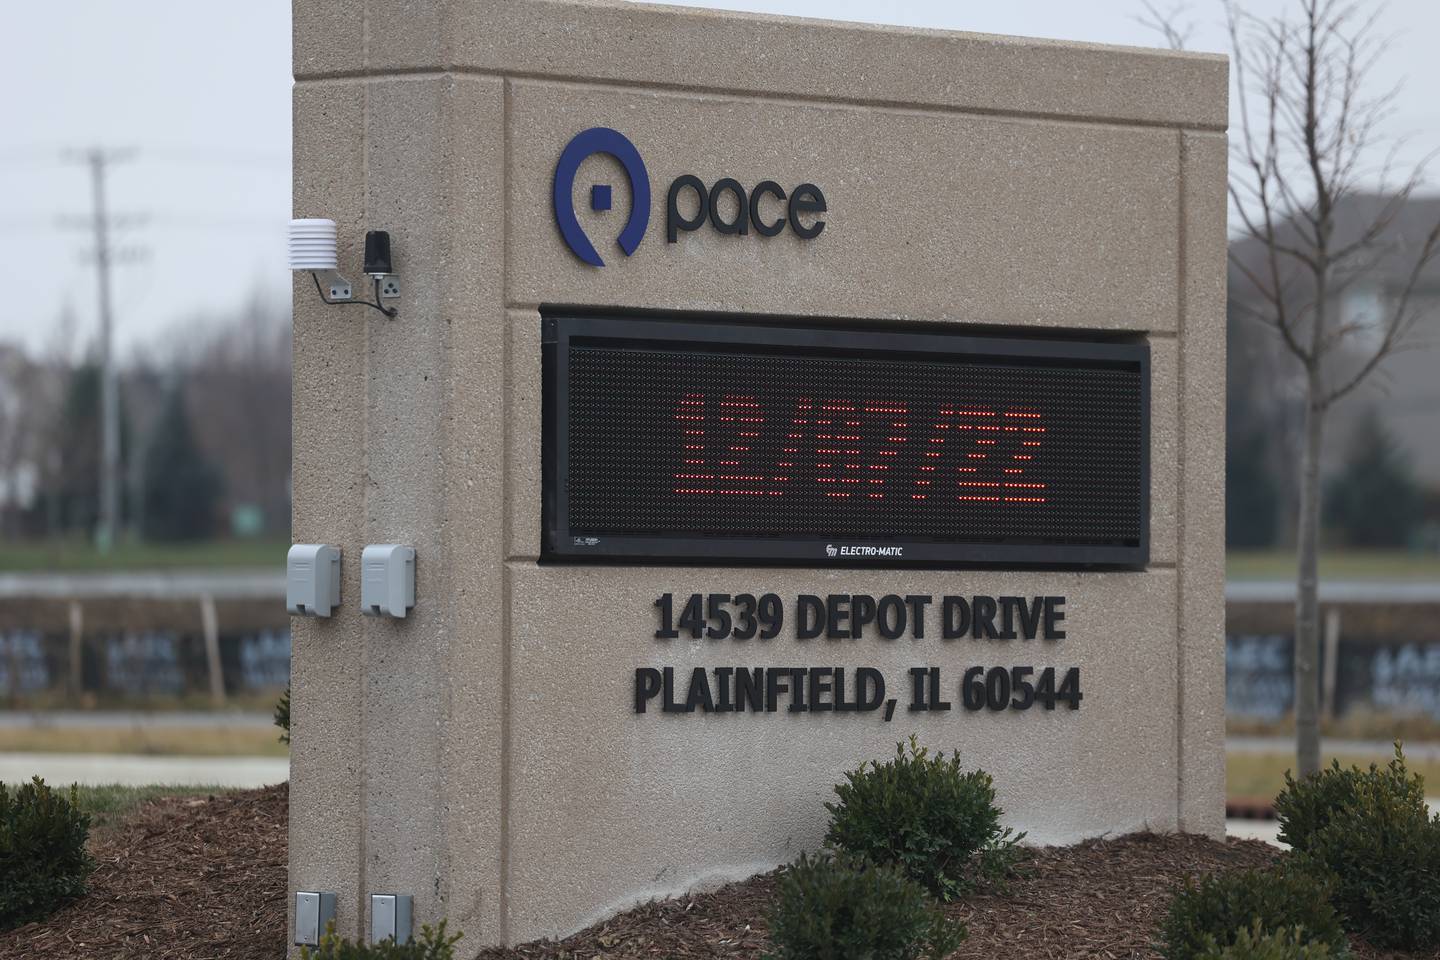 Pace’s brand new state-of-the-art New Heritage Plainfield Facility is now operational.